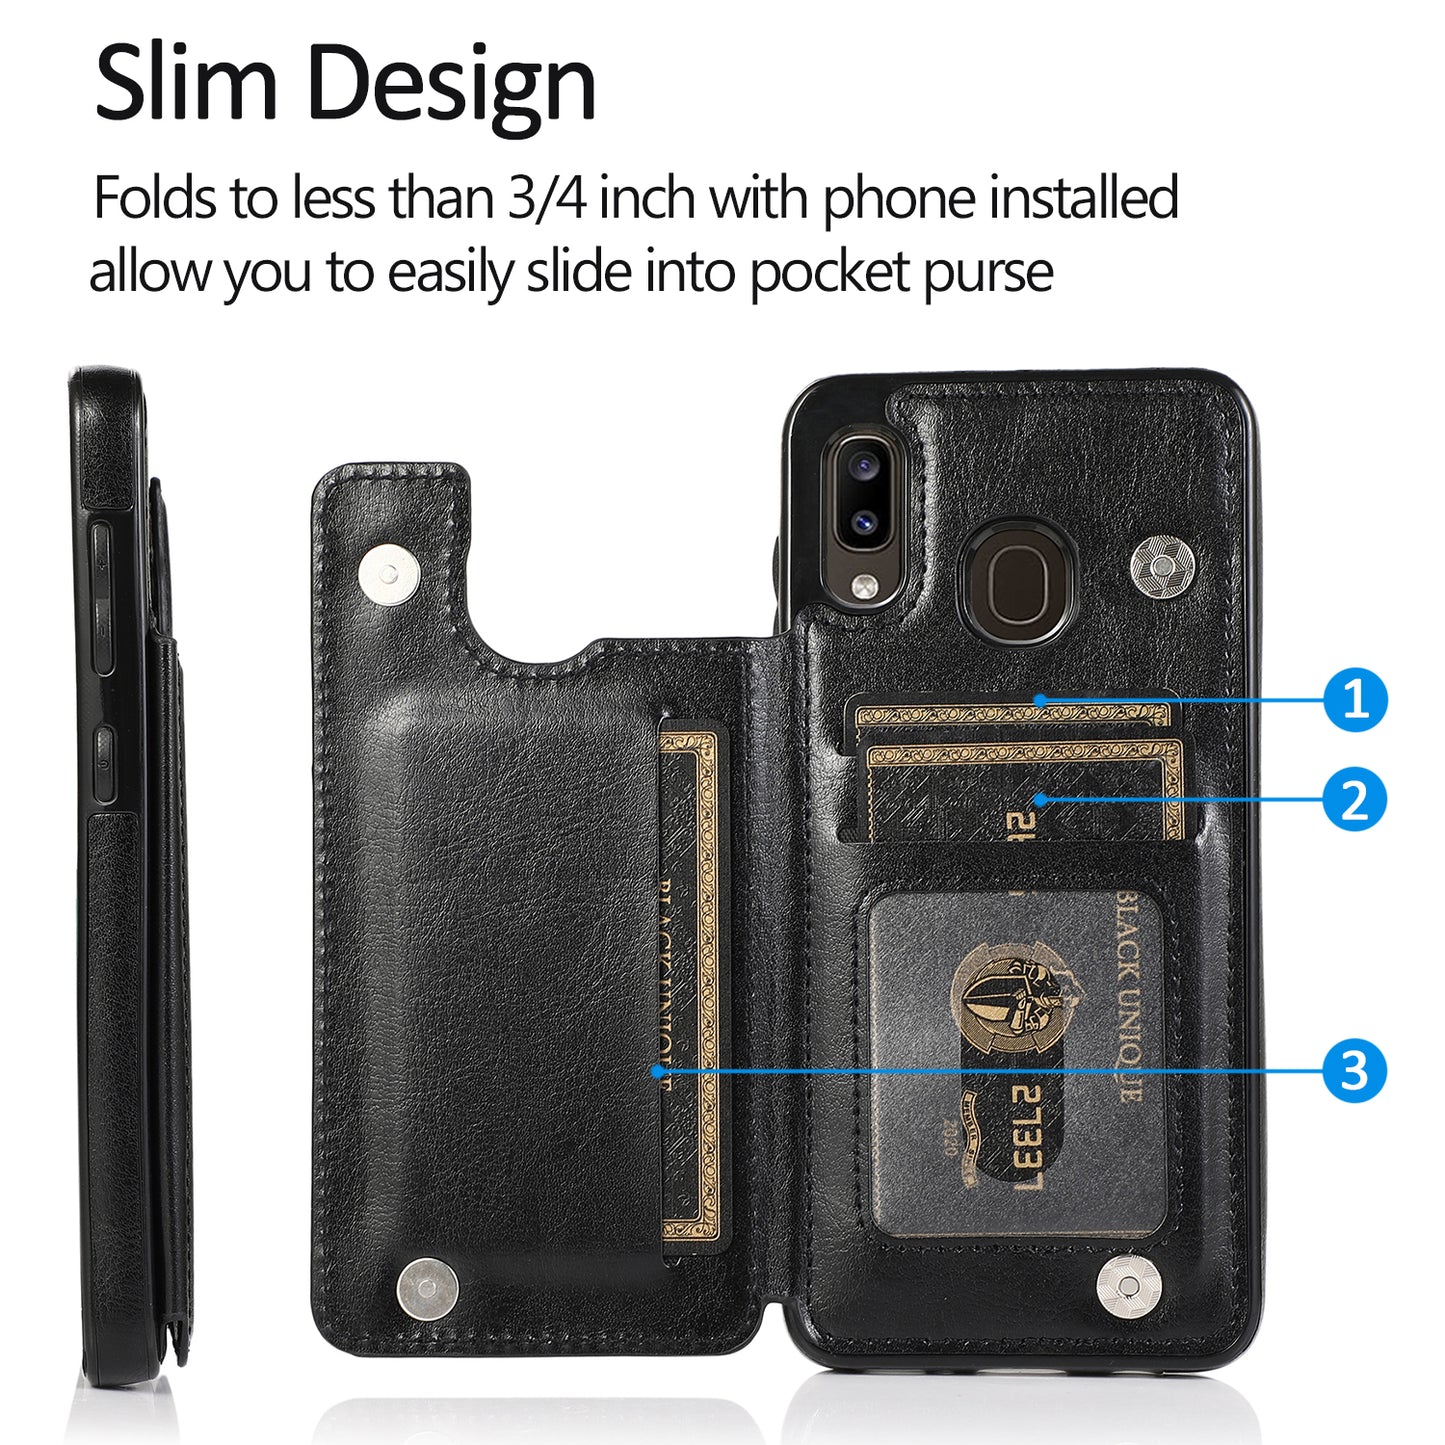 Samsung Galaxy A20 Leather Cover Double Buckles Shock Resistant Multiple Card Slots Magnetic Fold Pocket